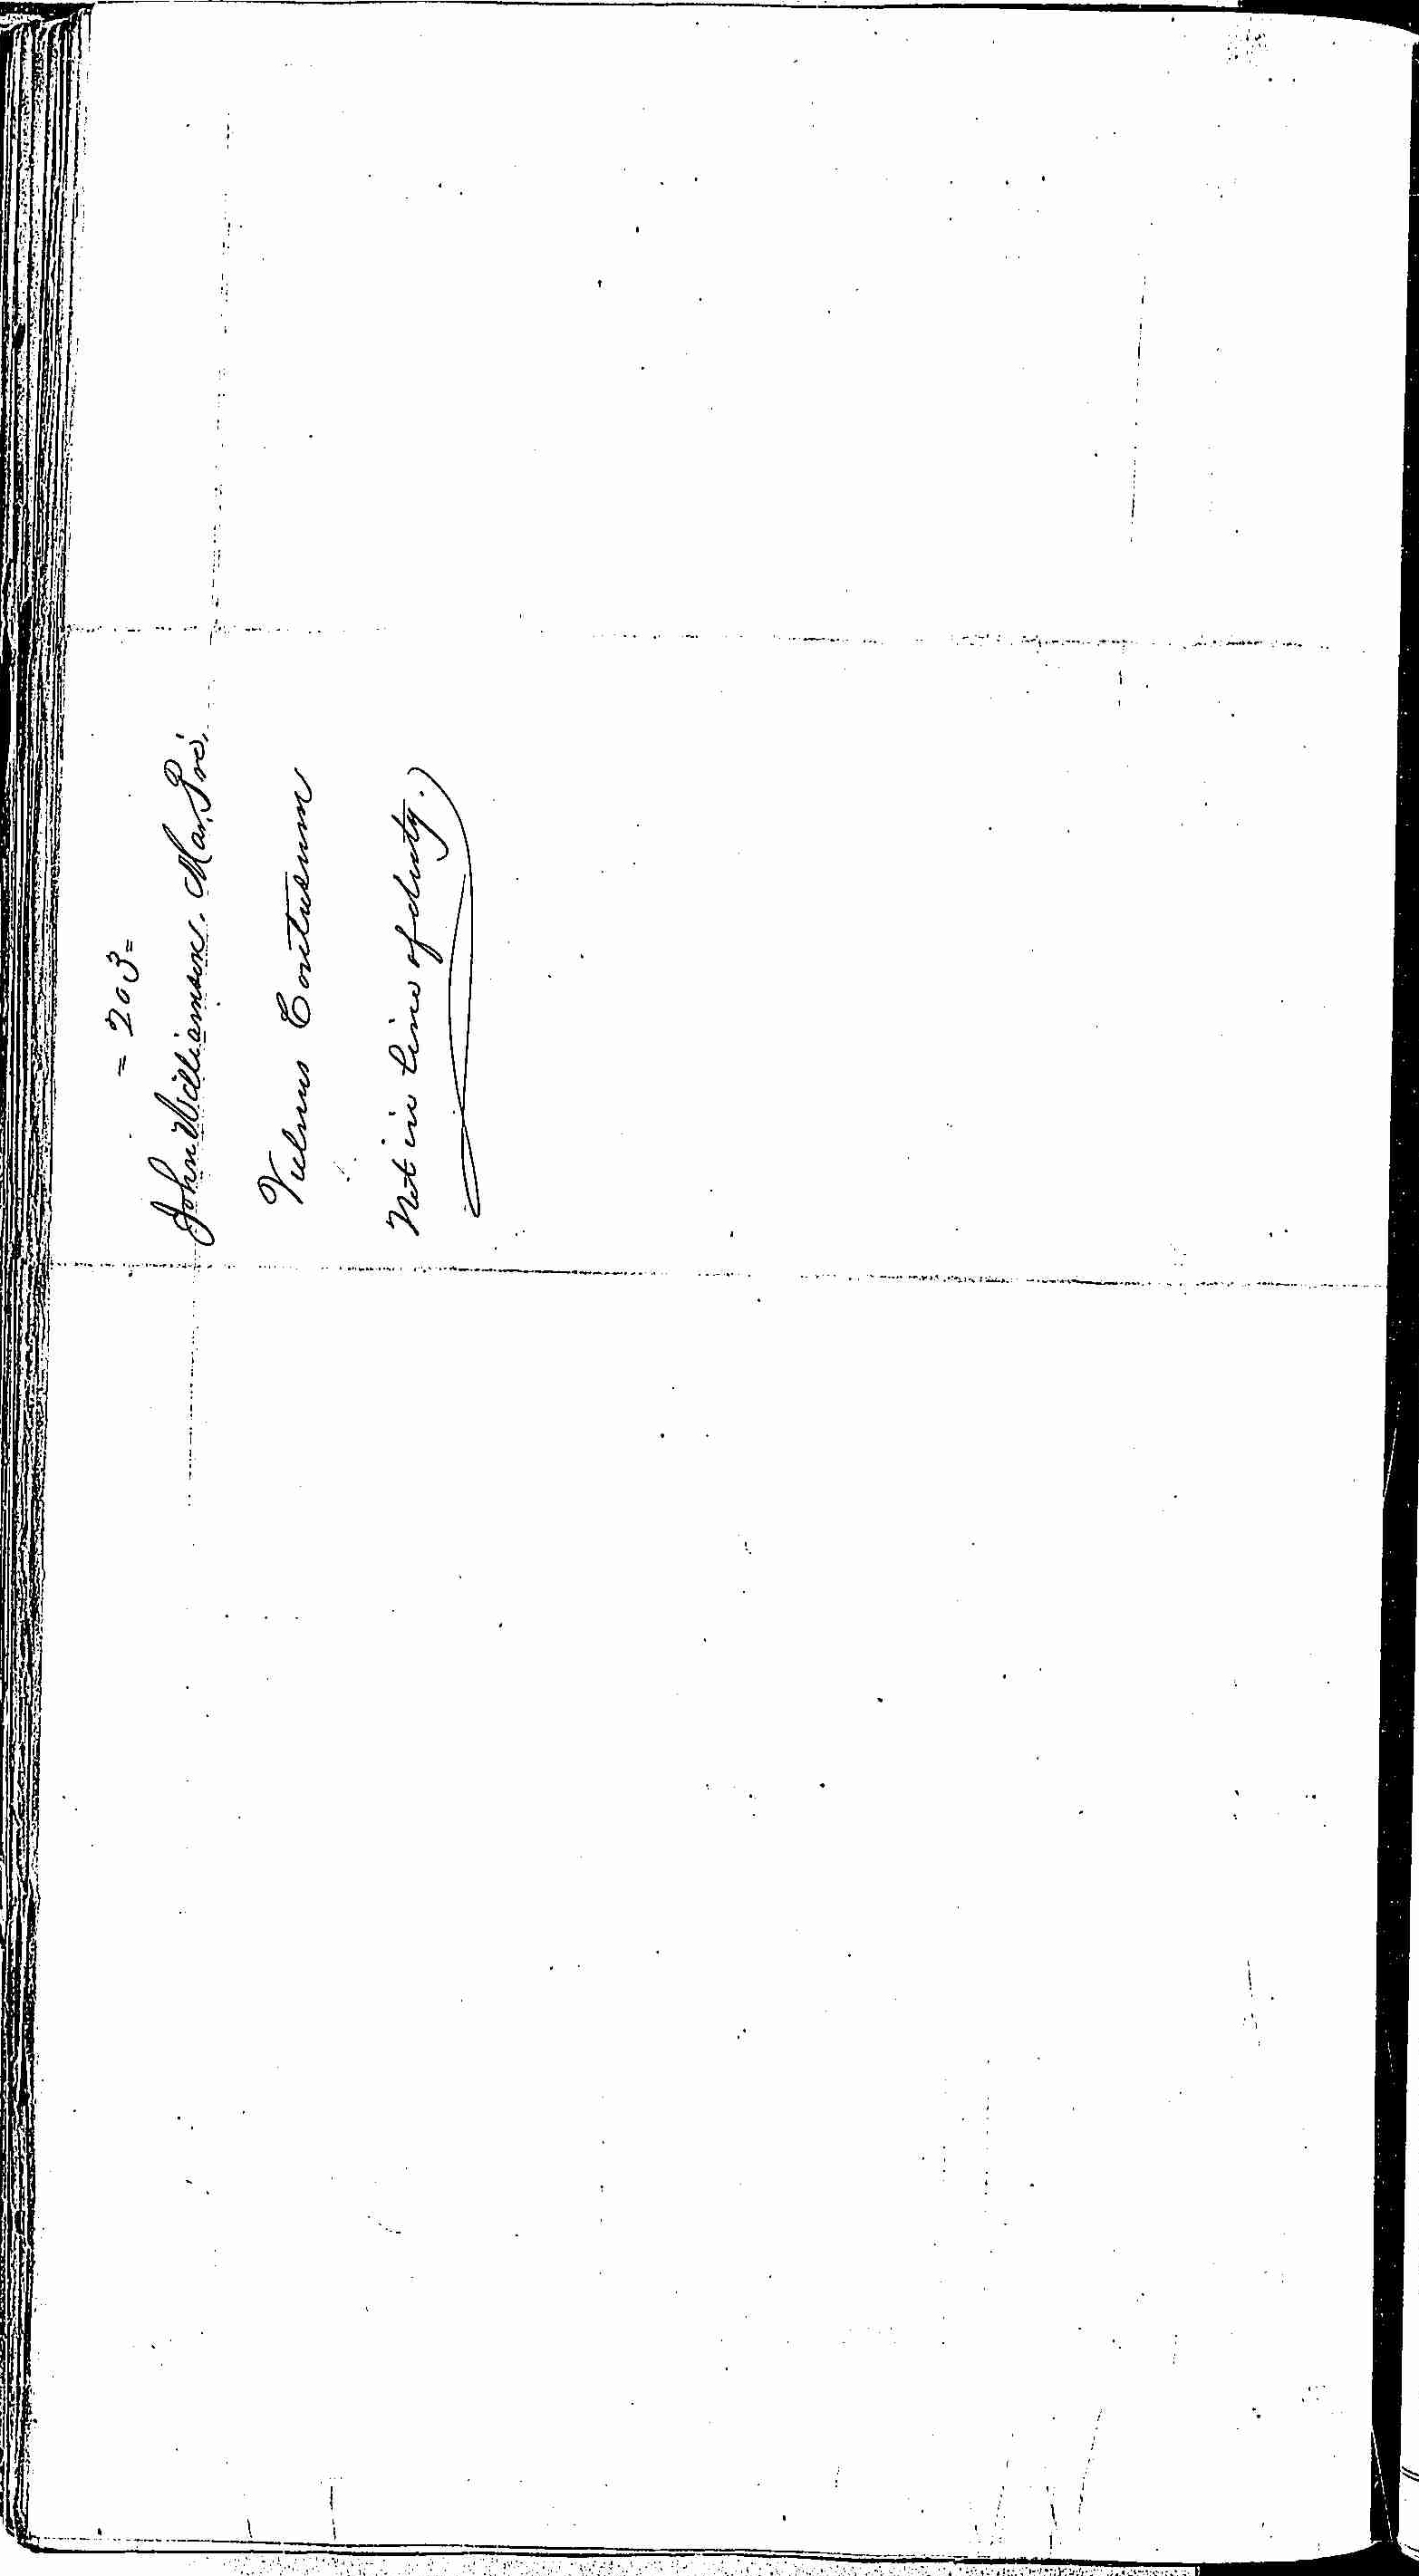 Entry for John Williamson (page 2 of 2) in the log Hospital Tickets and Case Papers - Naval Hospital - Washington, D.C. - 1866-68